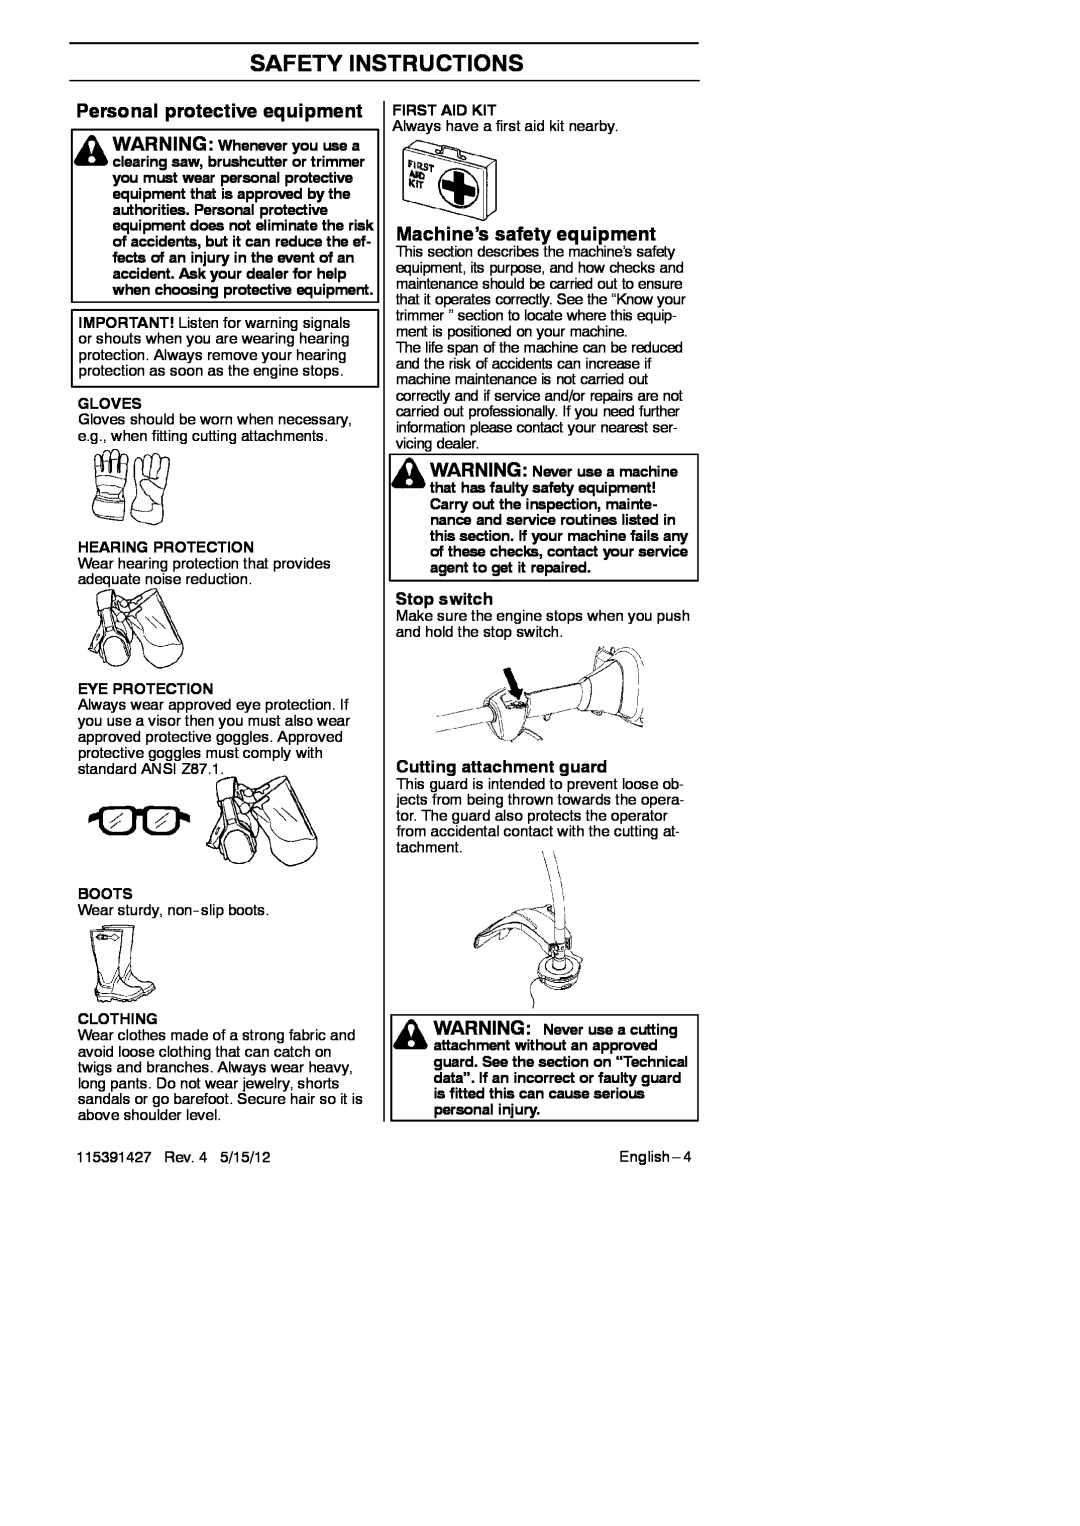 RedMax BT280 manual Safety Instructions, Personal protective equipment, Machine’s safety equipment, Stop switch 